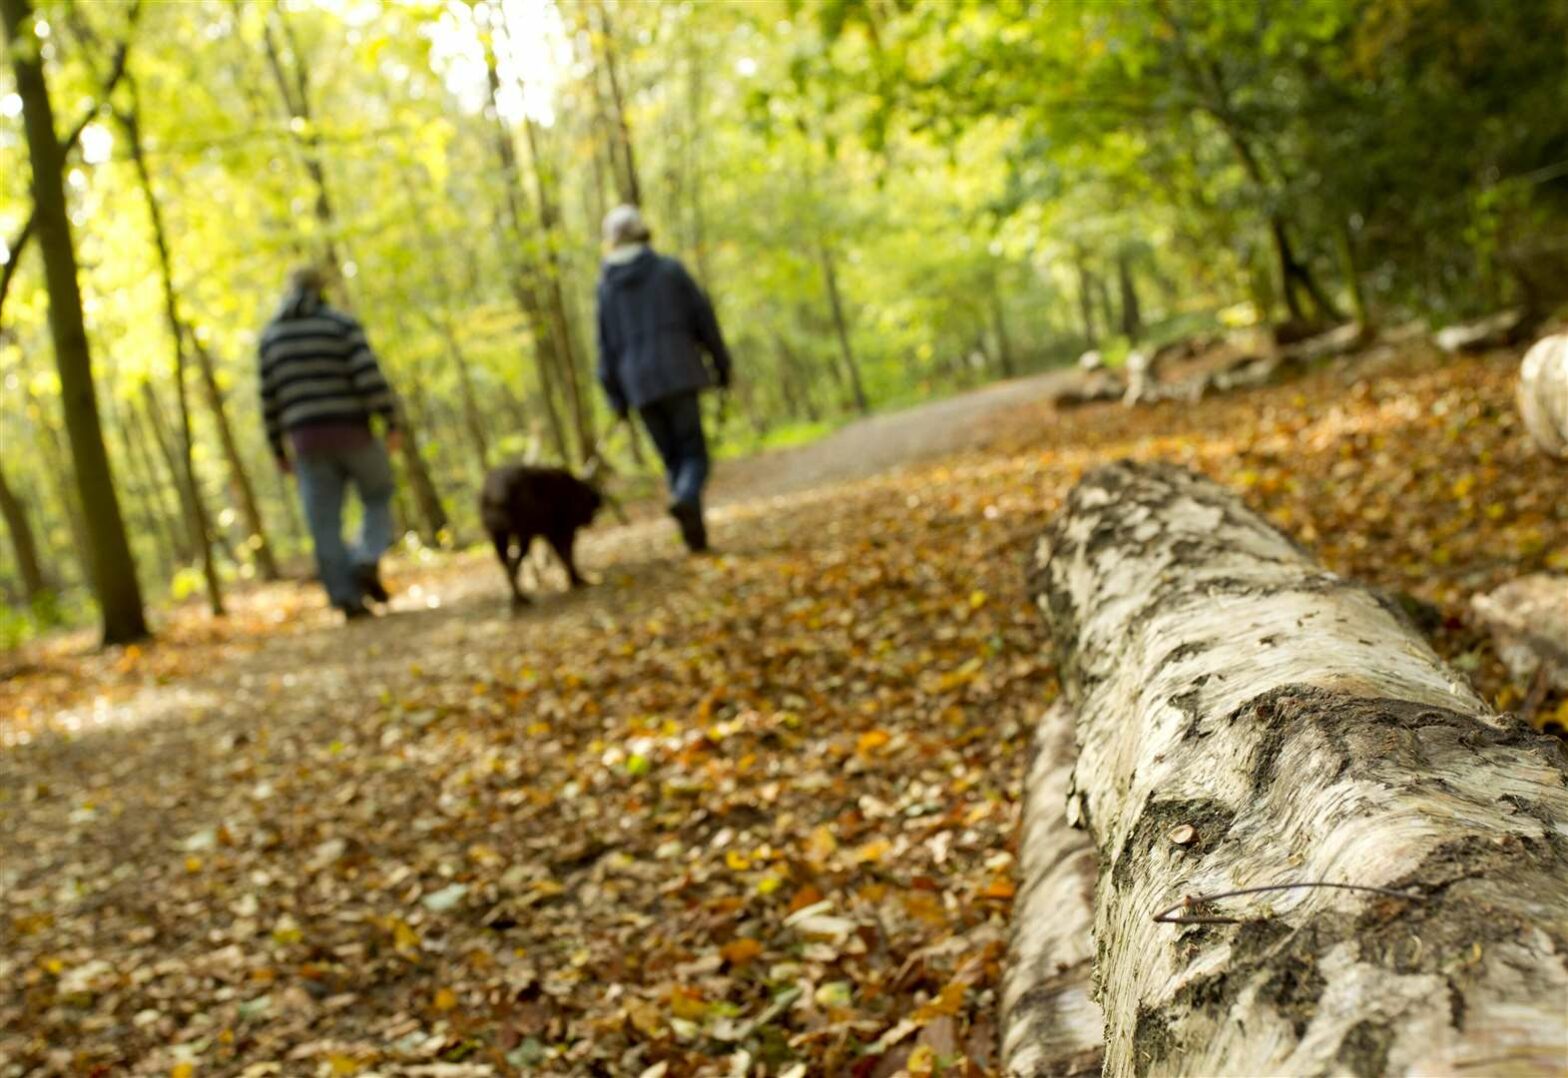 Changes to dog policy for nature reserves